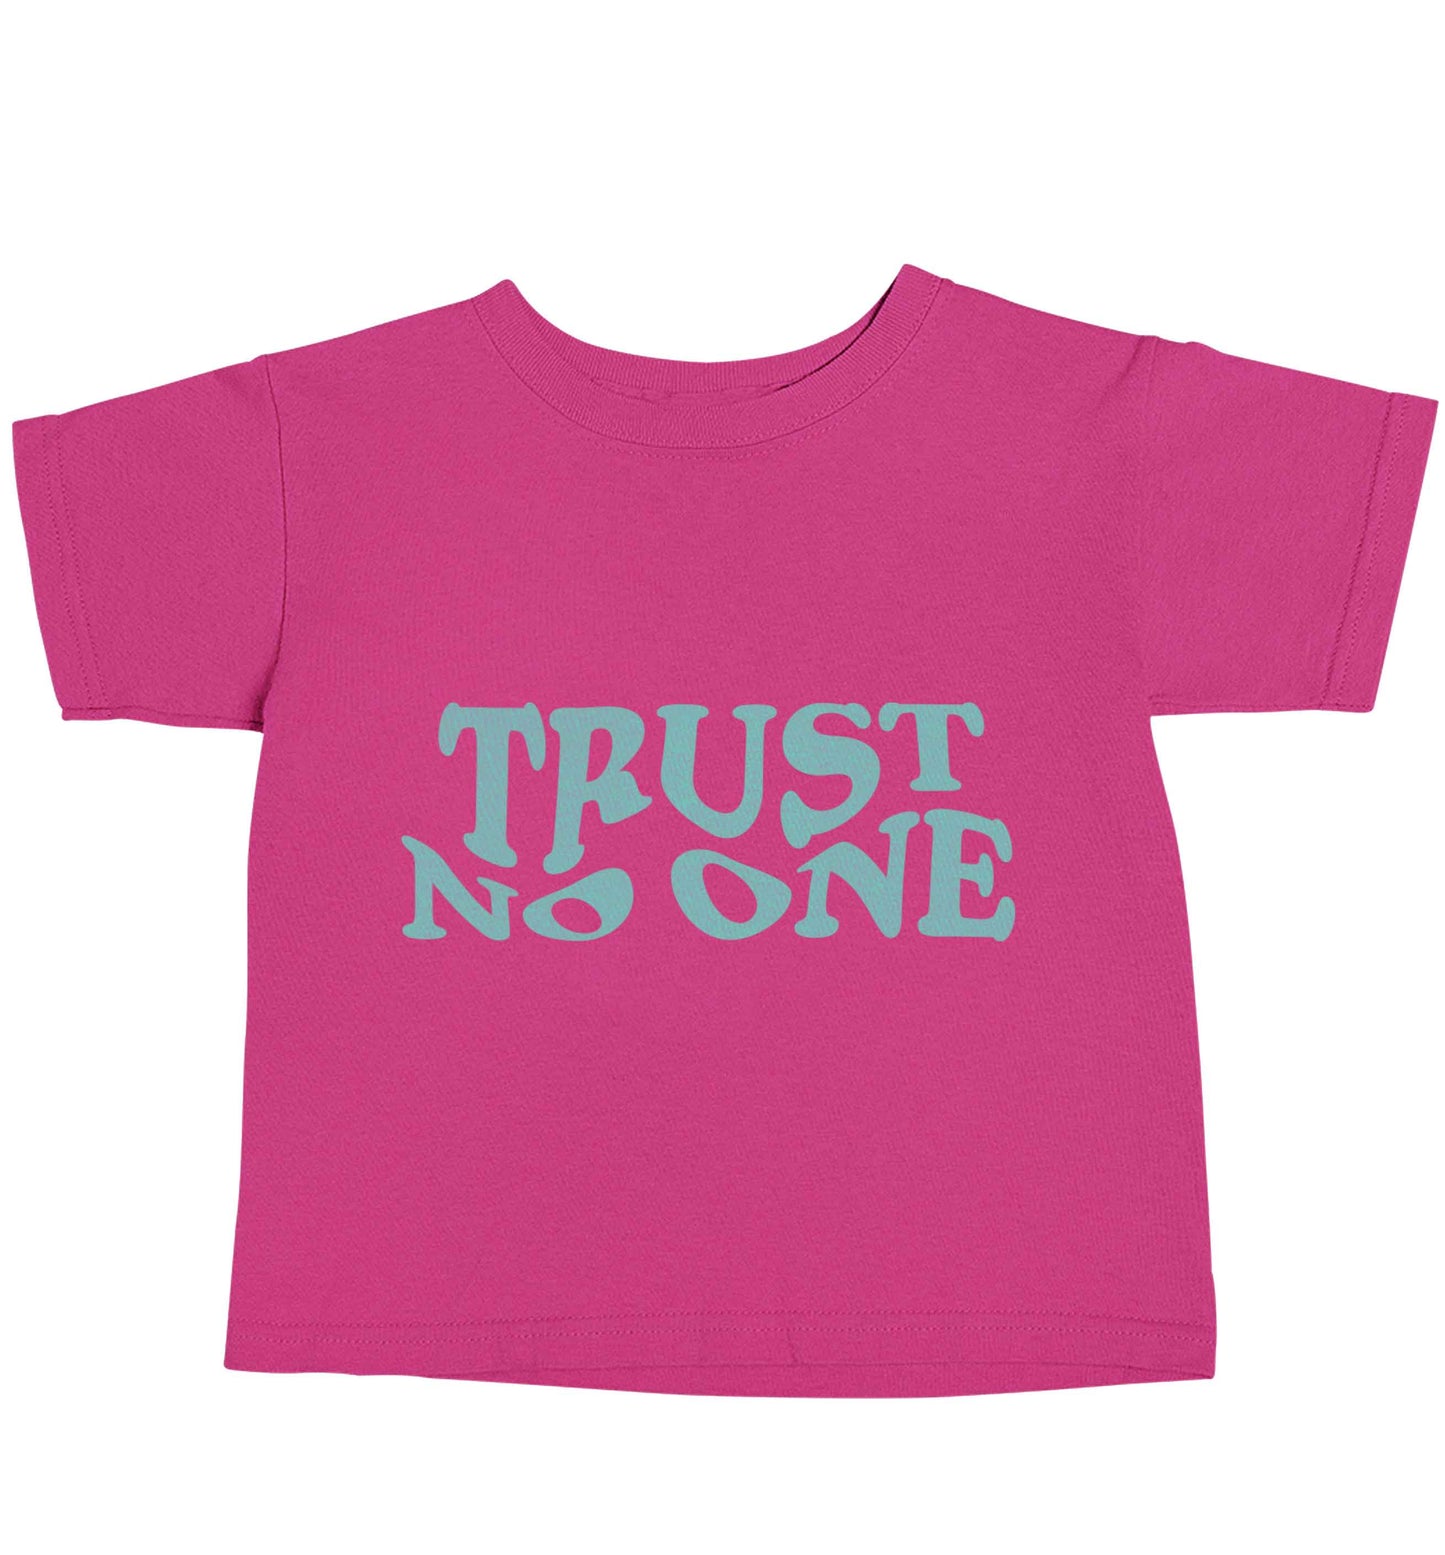 Trust no one pink baby toddler Tshirt 2 Years